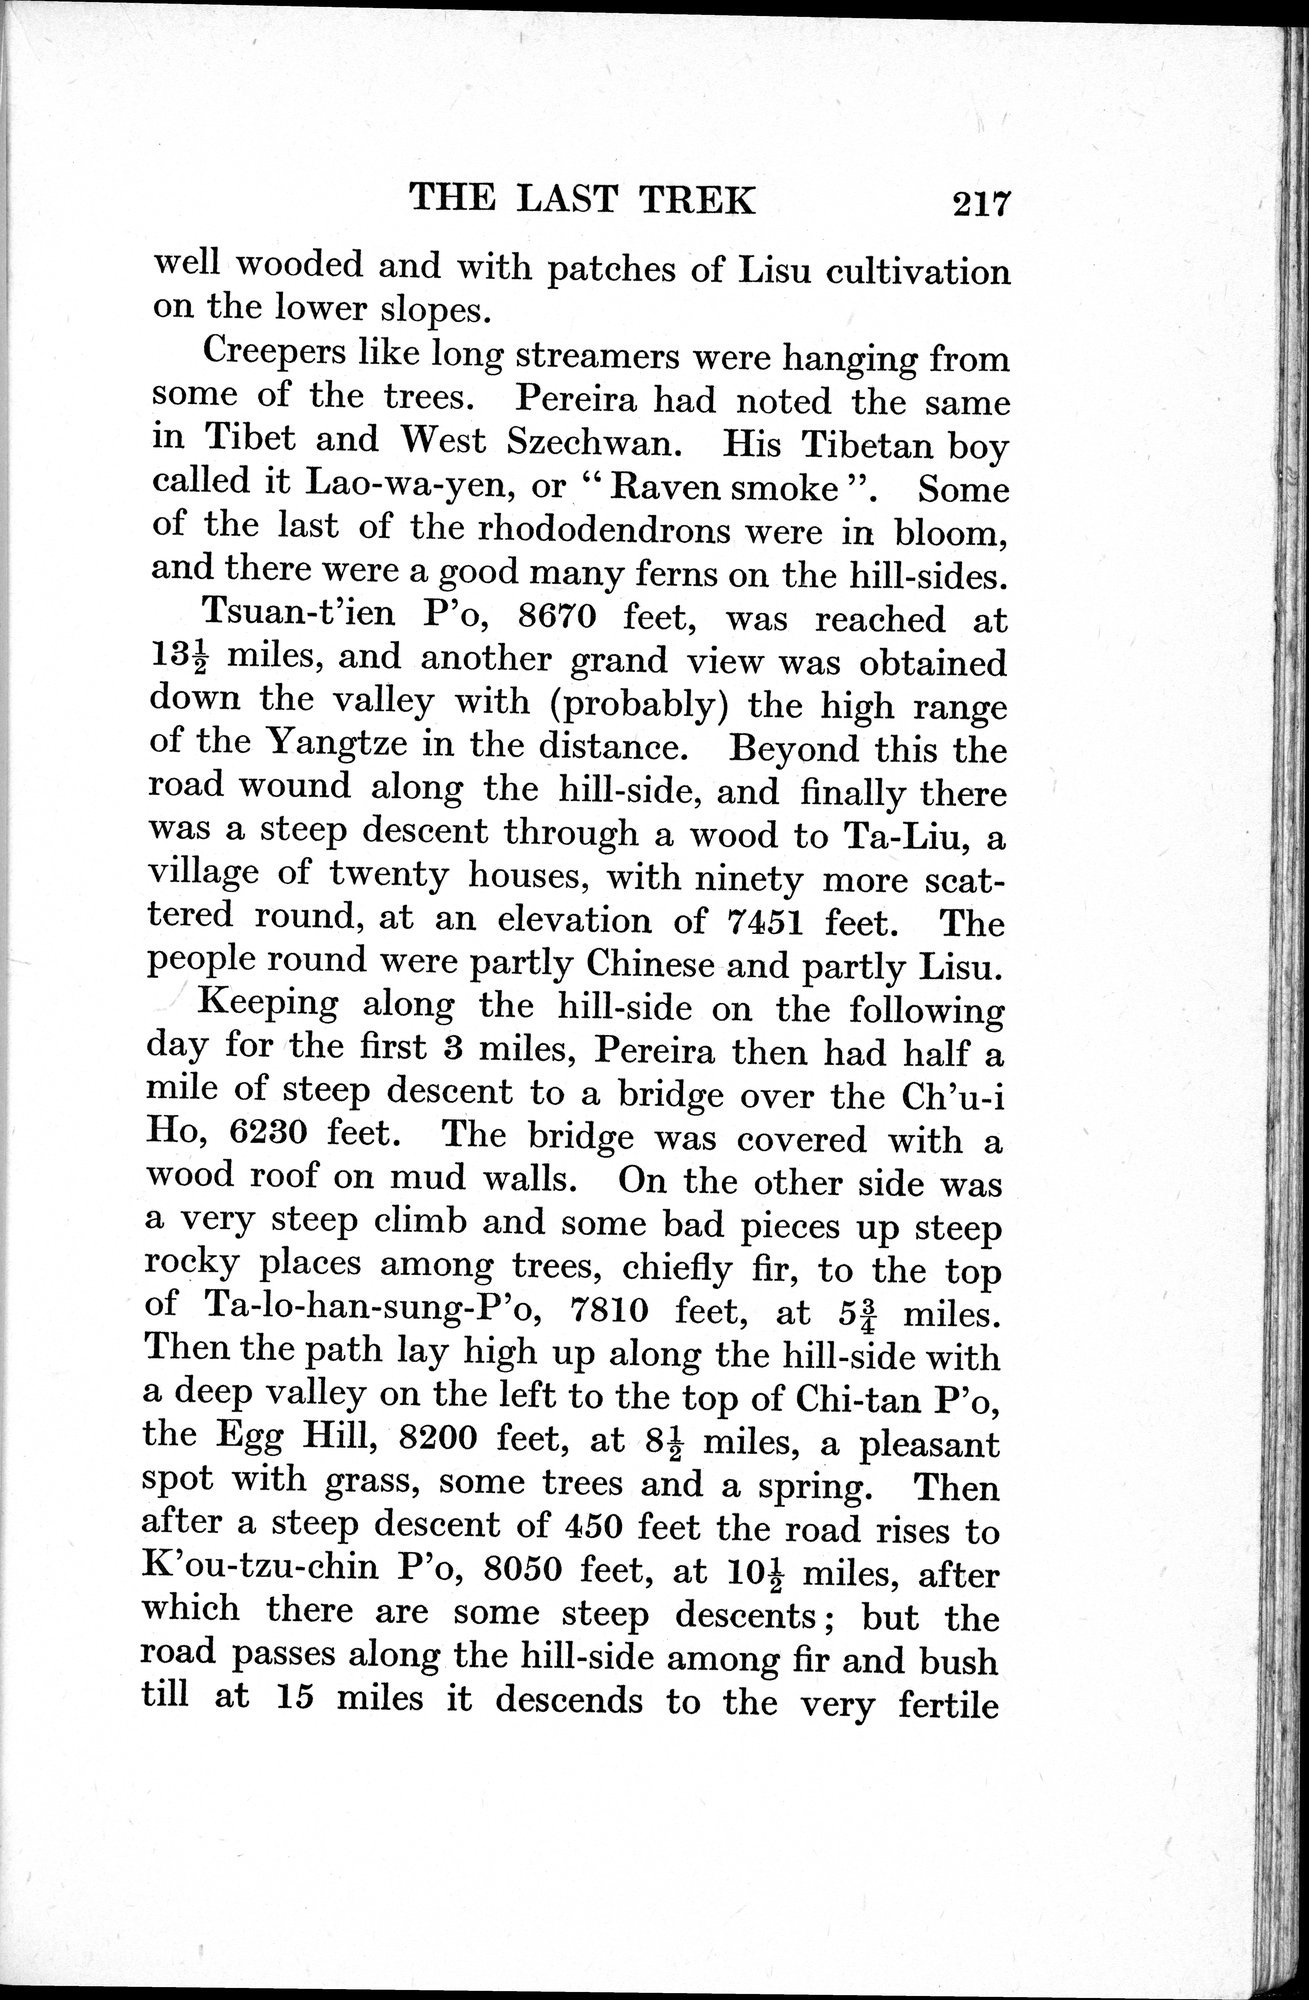 Peking to Lhasa : vol.1 / Page 301 (Grayscale High Resolution Image)